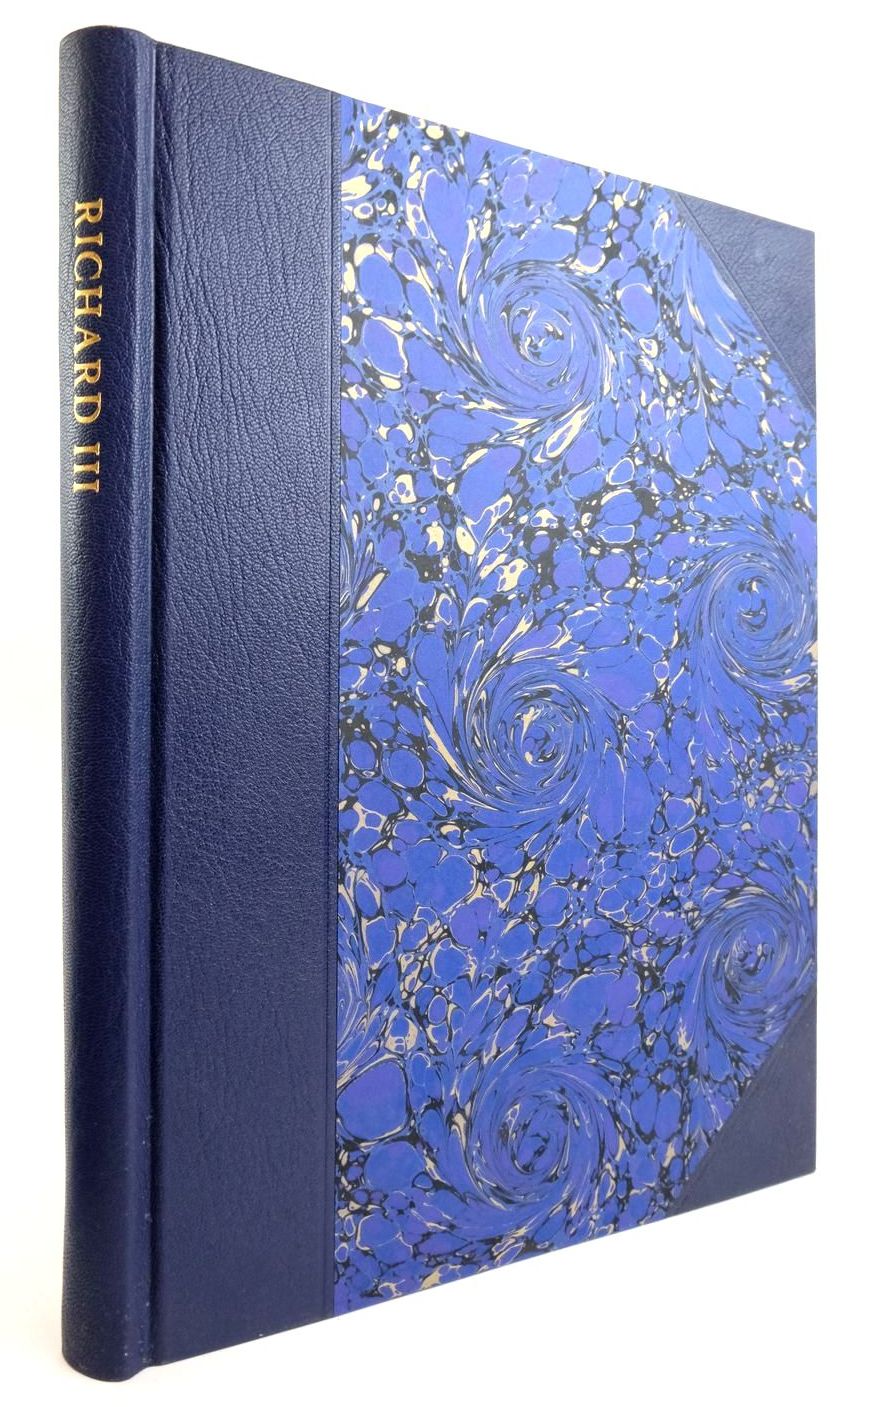 Photo of RICHARD III (THE LETTERPRESS SHAKESPEARE) written by Shakespeare, William
Jowett, John published by Folio Society (STOCK CODE: 1822927)  for sale by Stella & Rose's Books